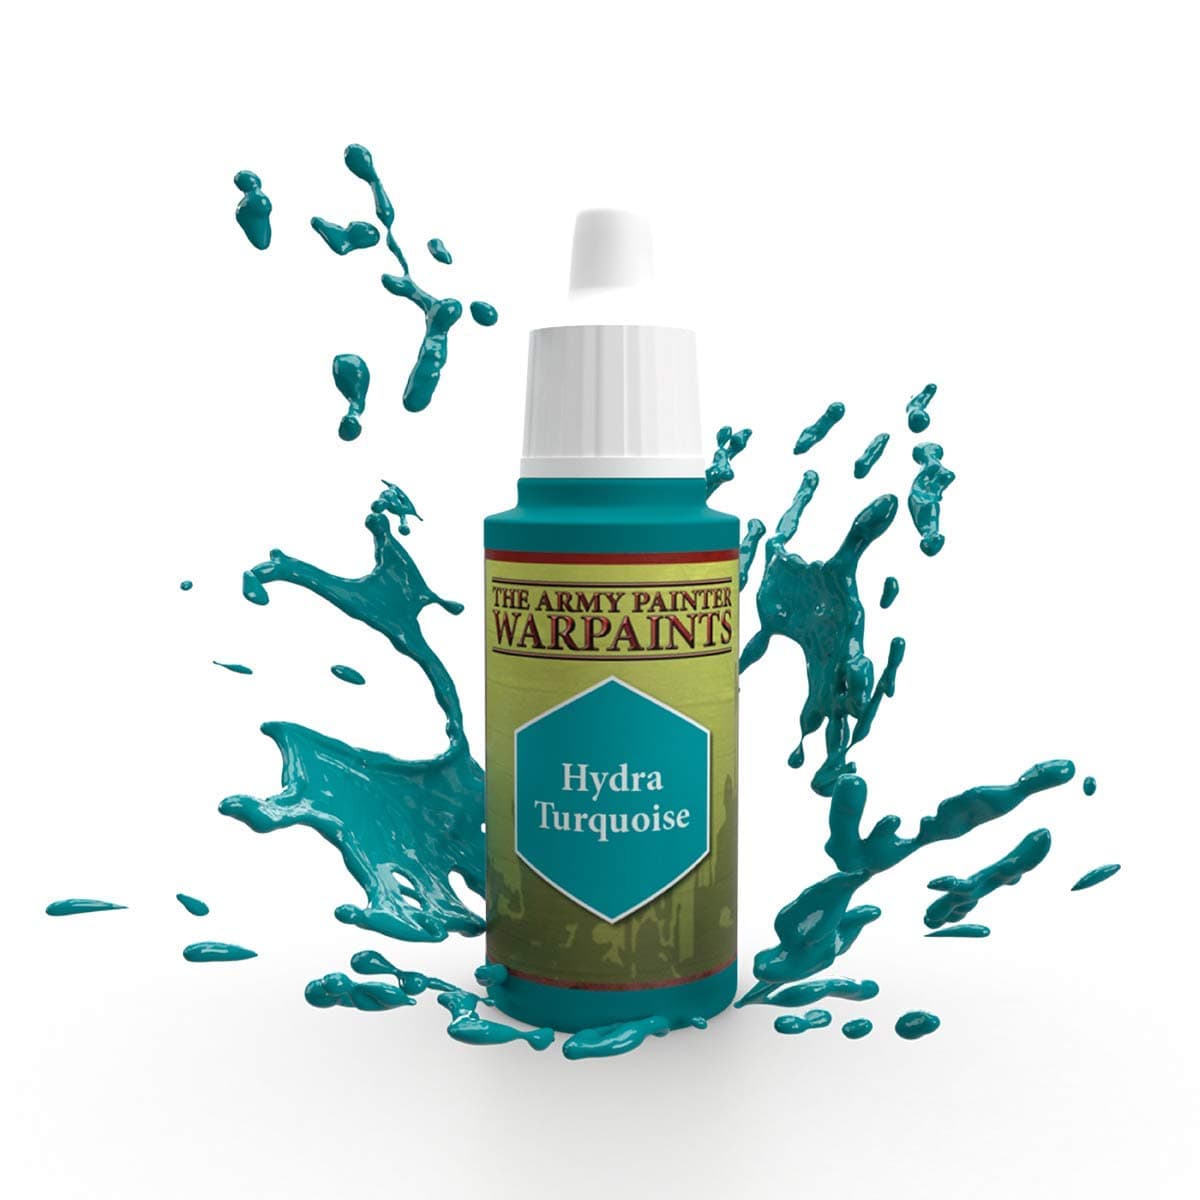 The Army Painter Accessories The Army Painter Warpaints: Hydra Turquoise 18ml